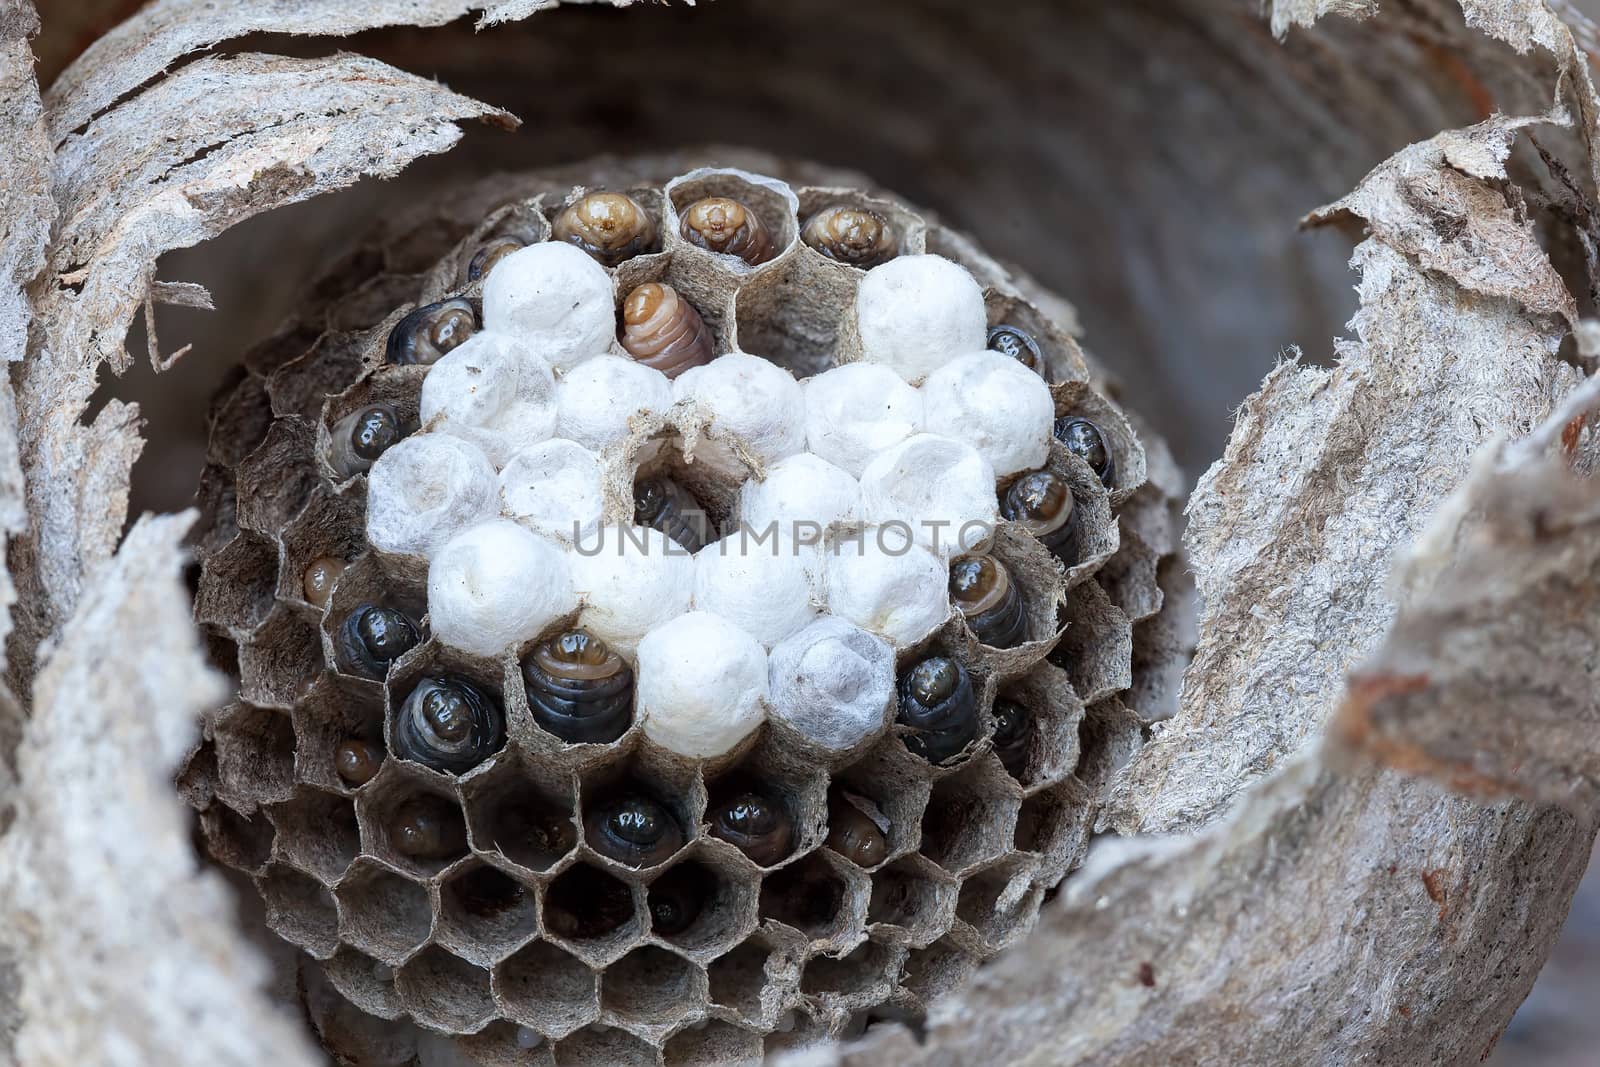 Inside of a yellow jacket wasp nest with larvae and eggs in cells of hive closeup macro